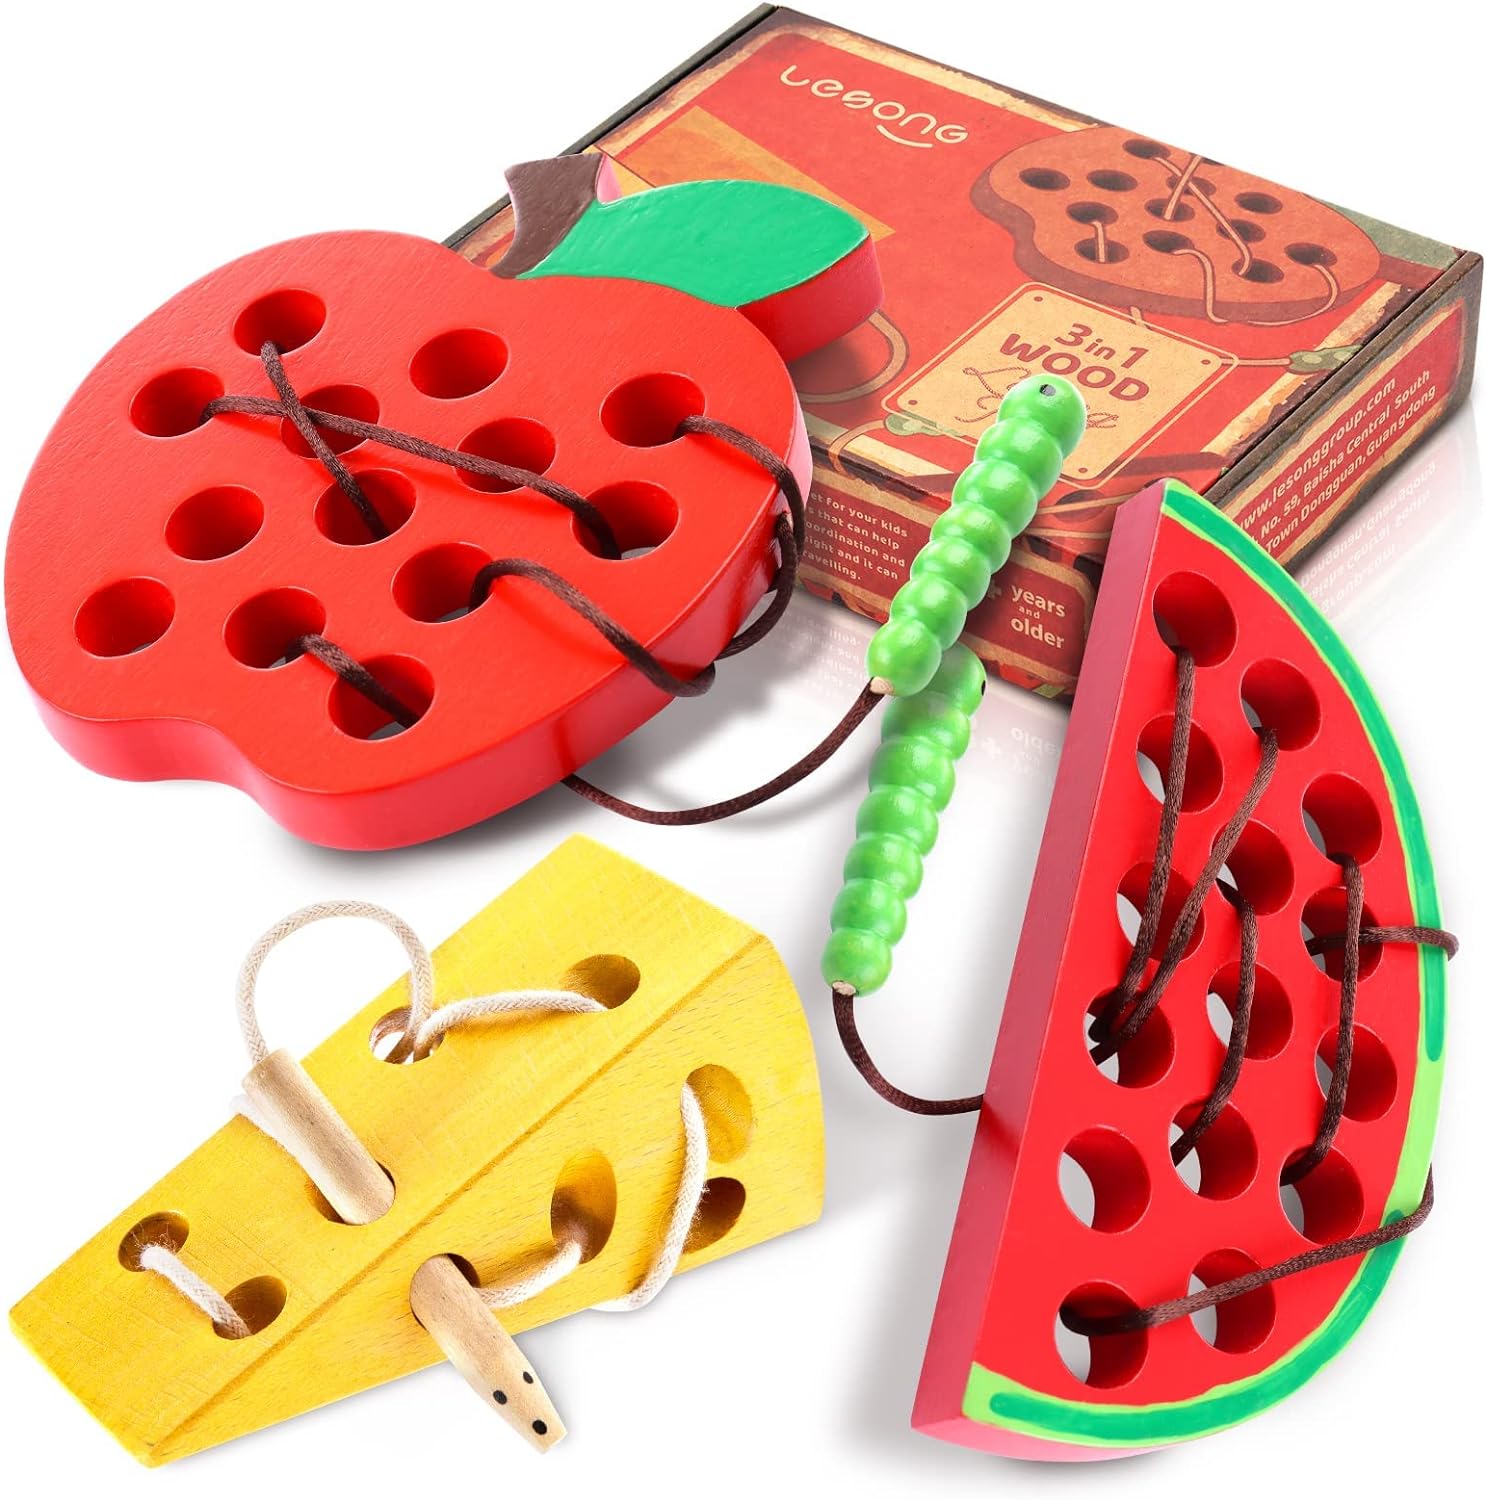 KLT Lacing Toy for Toddlers, Wooden Threading Toy Kids Travel Car Airplane Activities, Road Trip Essentials Games, Educational learning Fine Motor Skills Montessori Toys 1 Apple,1 Watermelon, 1 Cheese